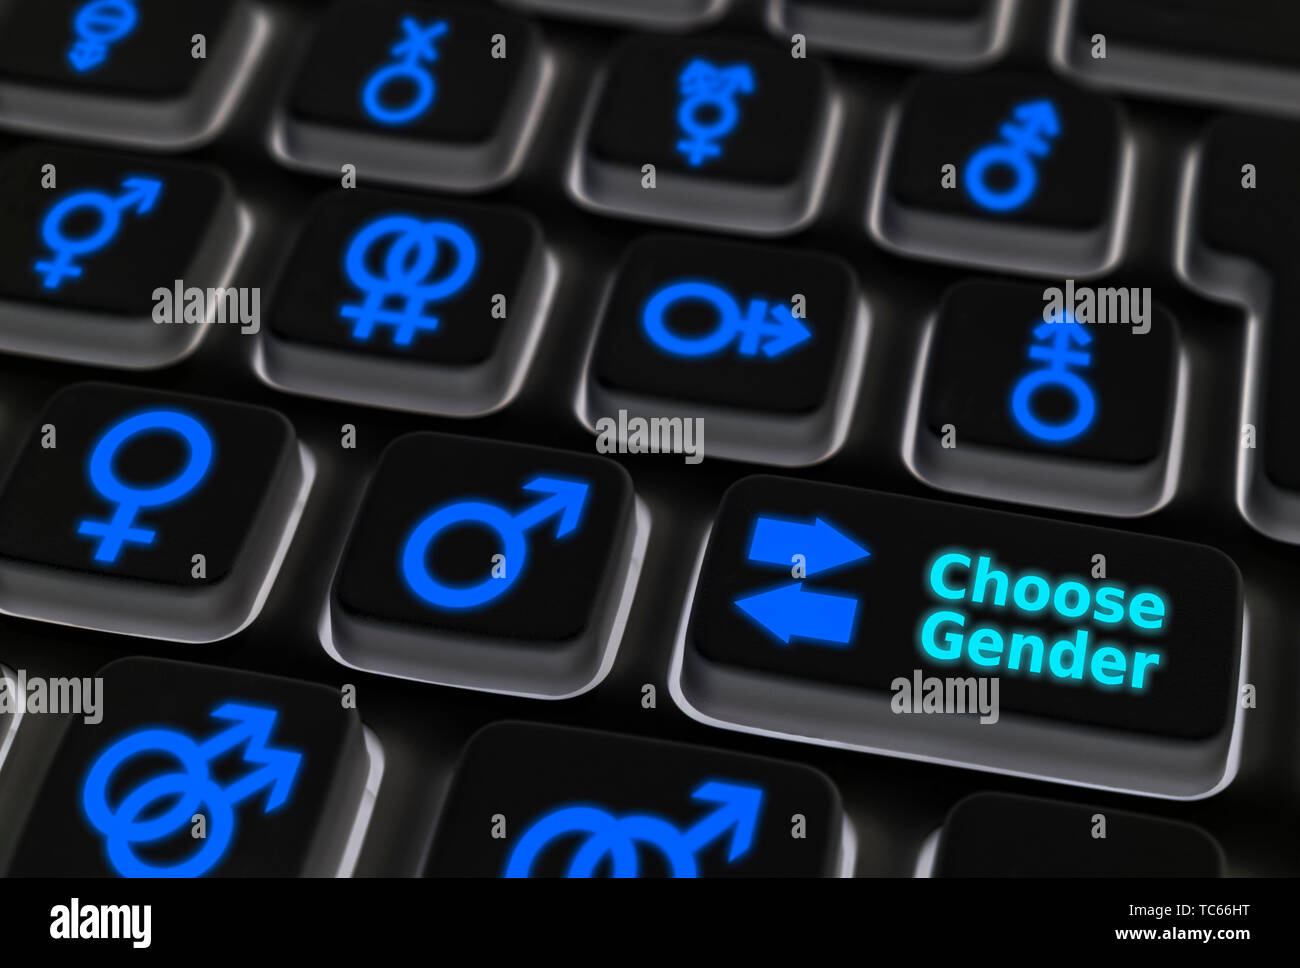 Computer keyboard with different gender symbols on the buttons to show many different genders that people may choose to identify as. Gender identity. Stock Photo